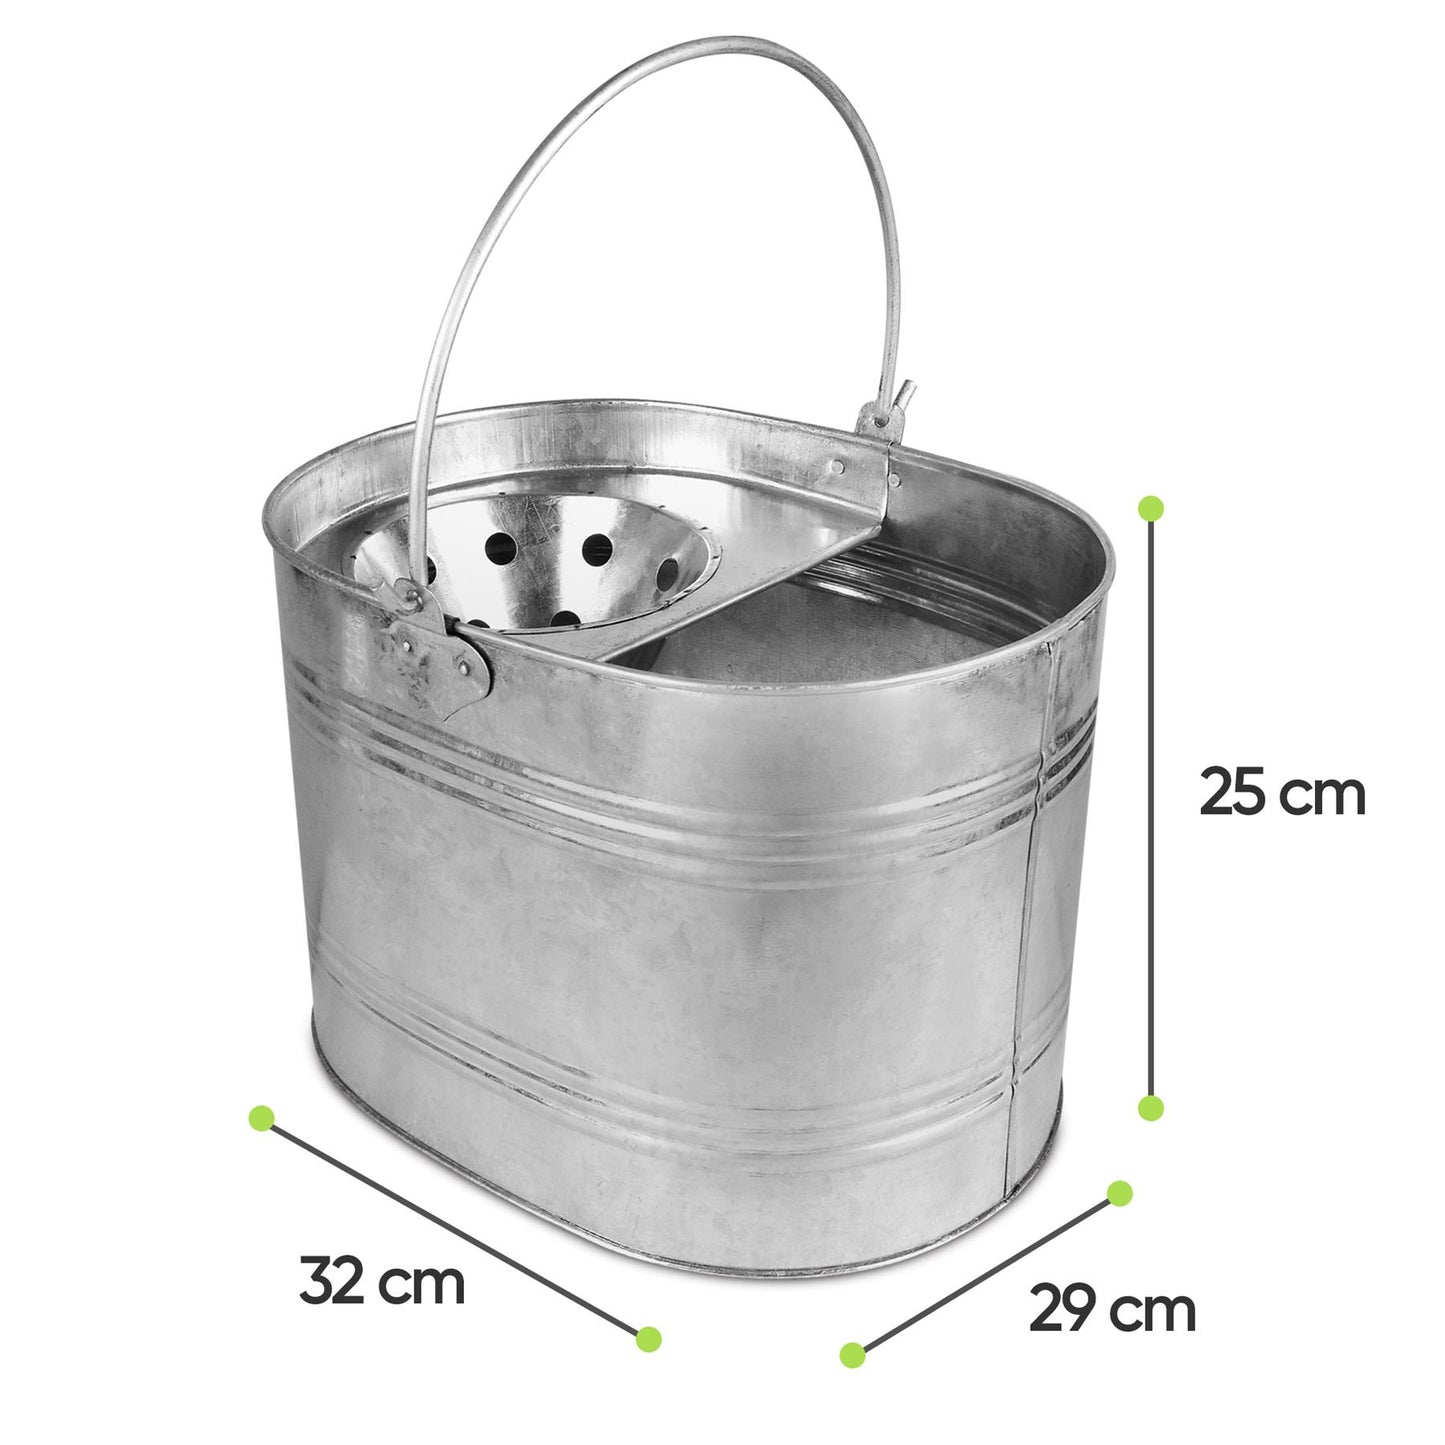 Heavy-Duty Metal Mop Bucket For Efficient Cleaning